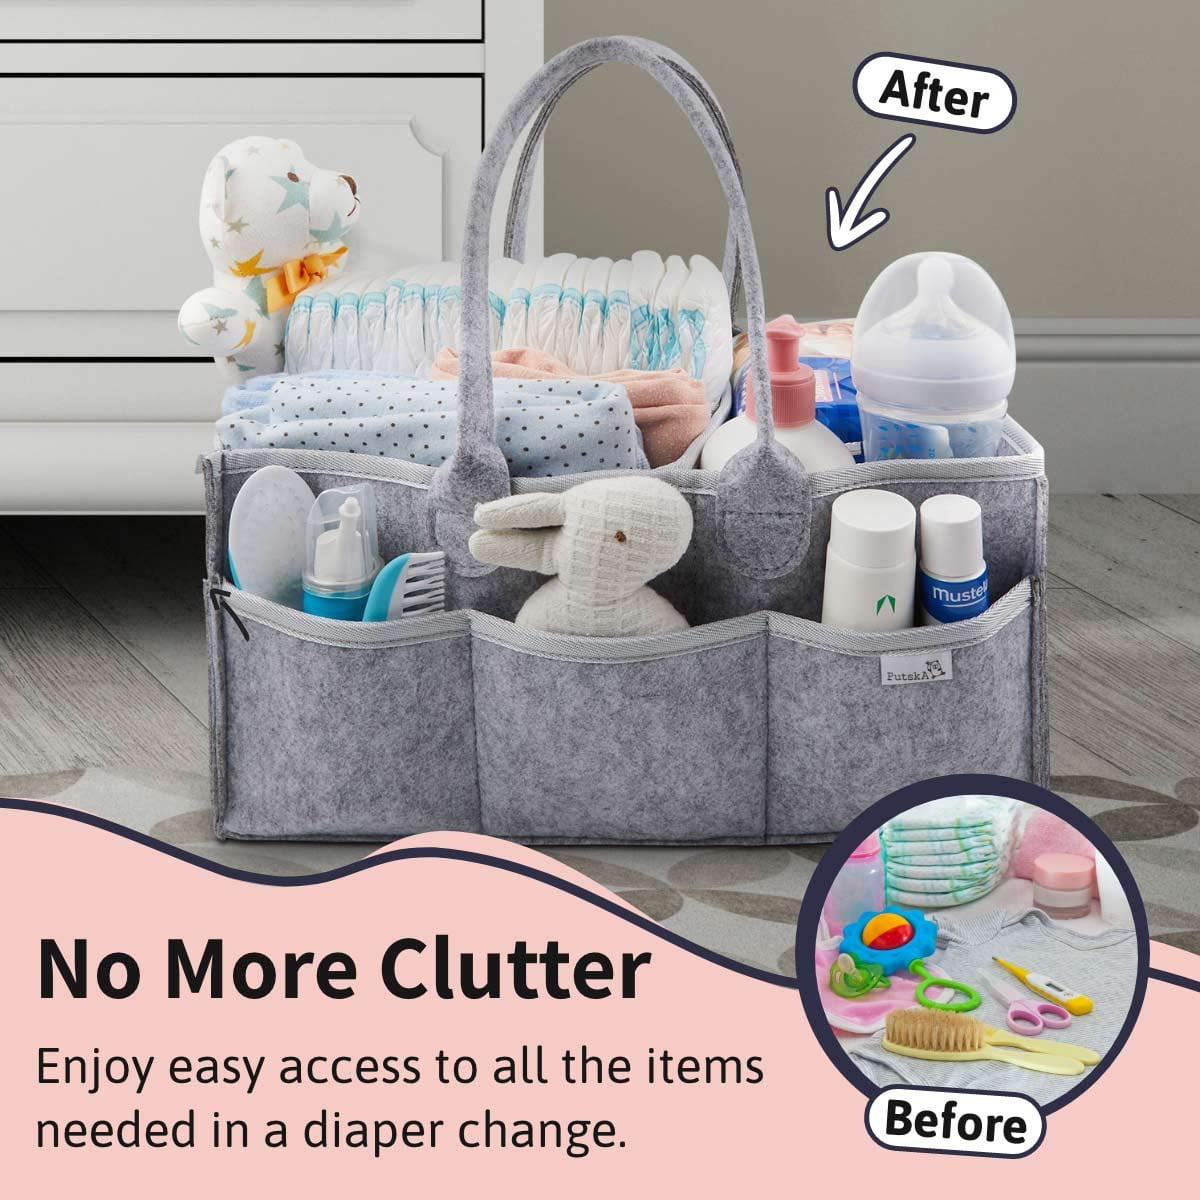 Putska Baby Diaper Caddy Organizer 2 Bibs Portable Holder Bag for Changing Table and Car Nursery Essentials Storage bins gifts with 2 Pacifier Clips 